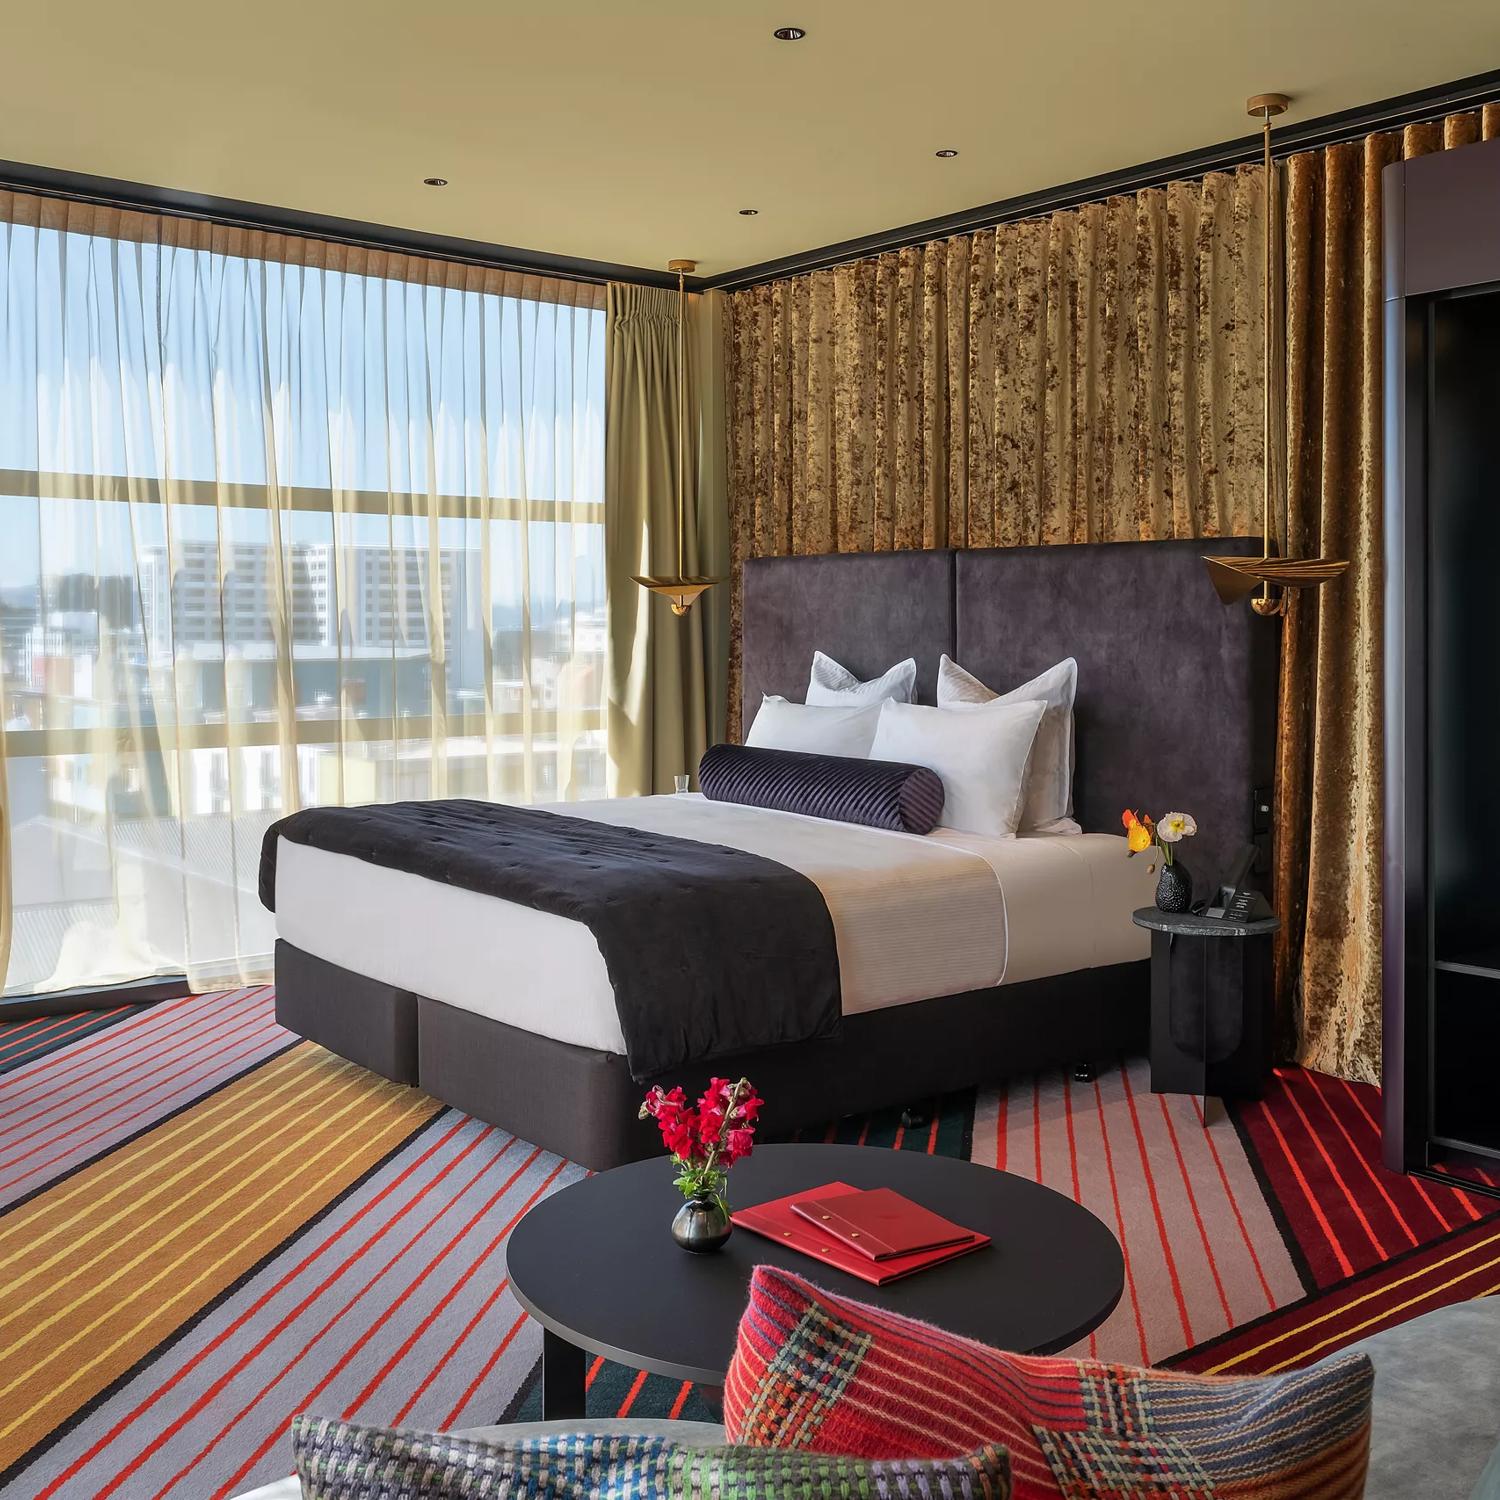 Located in Wellington's Naumi Hotel, the room features a king-sized bed, a wardrobe, and a small table with a chair. The floor-to-ceiling window, draped with sheer material, offers a city view. 